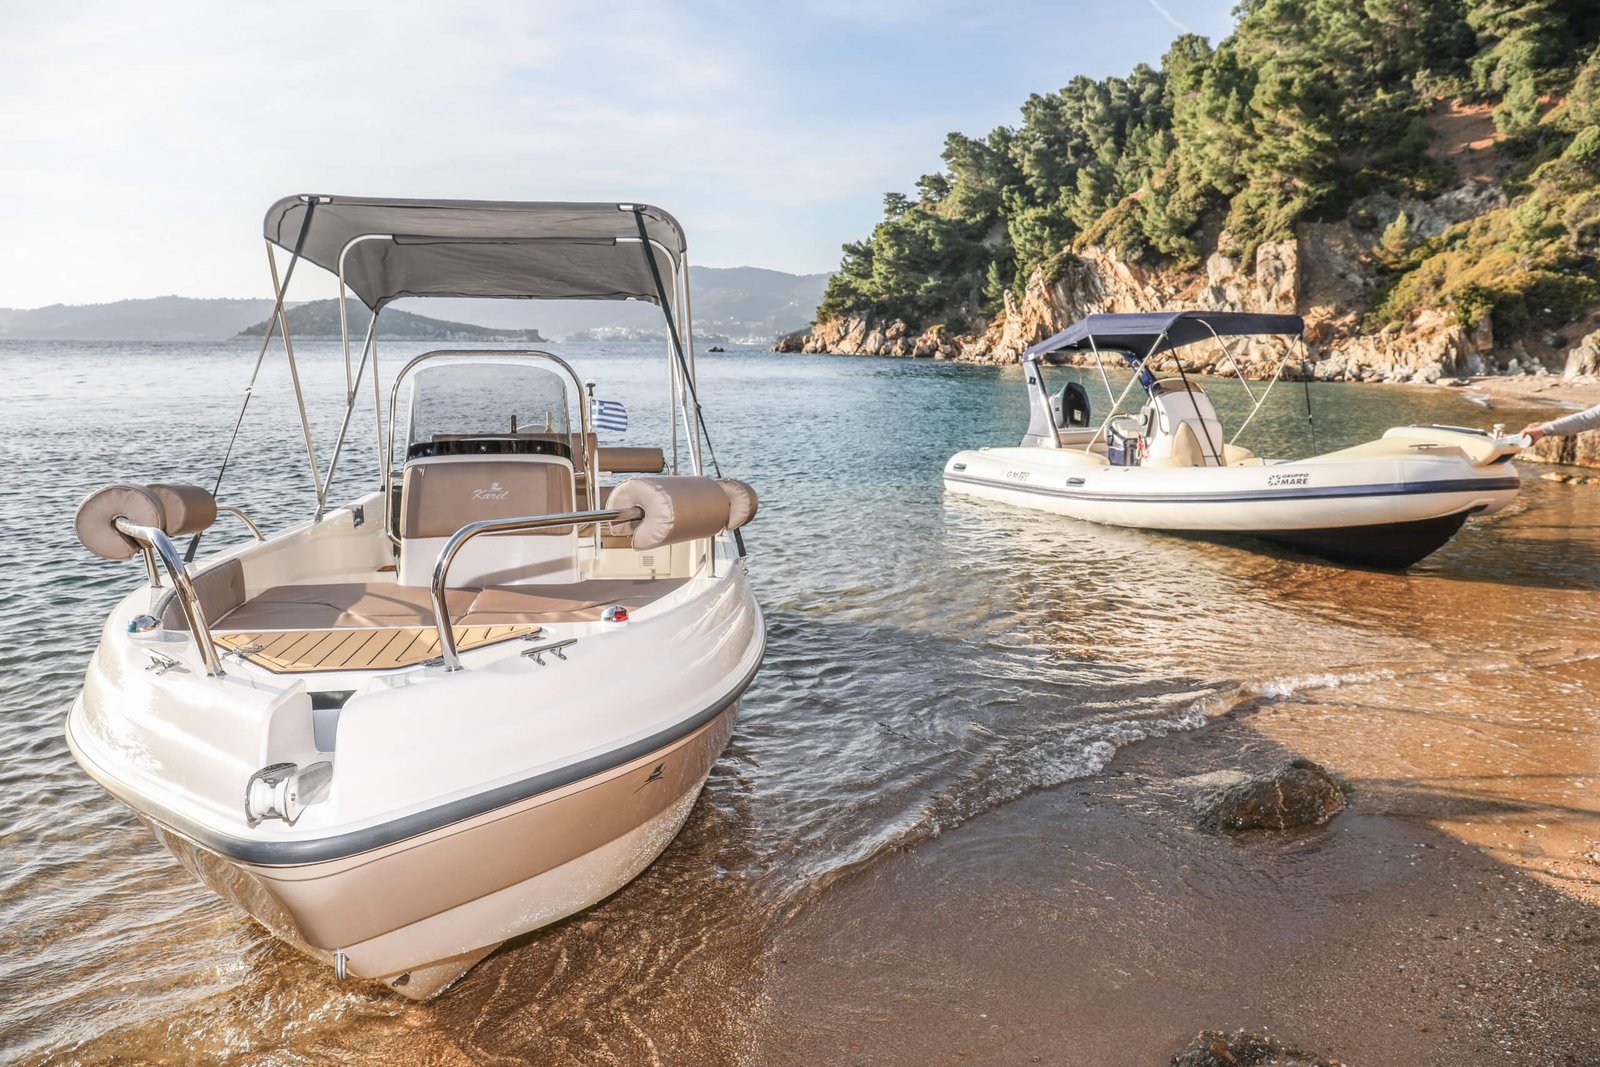 GR boat rental - Boats to hire in Skiathos